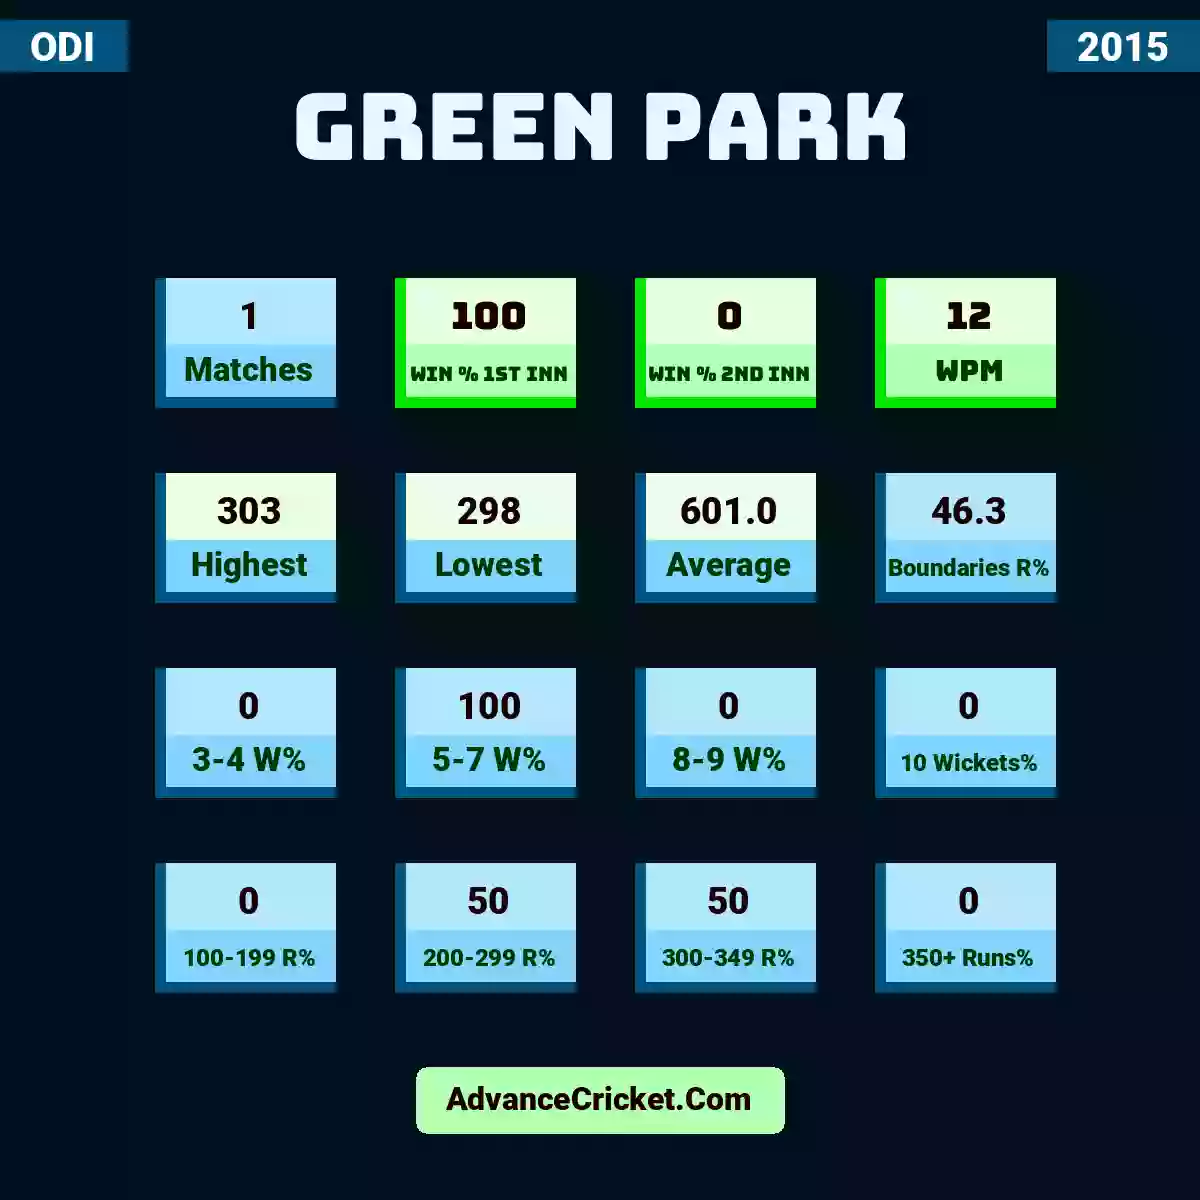 Image showing Green Park with Matches: 1, Win % 1st Inn: 100, Win % 2nd Inn: 0, WPM: 12, Highest: 303, Lowest: 298, Average: 601.0, Boundaries R%: 46.3, 3-4 W%: 0, 5-7 W%: 100, 8-9 W%: 0, 10 Wickets%: 0, 100-199 R%: 0, 200-299 R%: 50, 300-349 R%: 50, 350+ Runs%: 0.